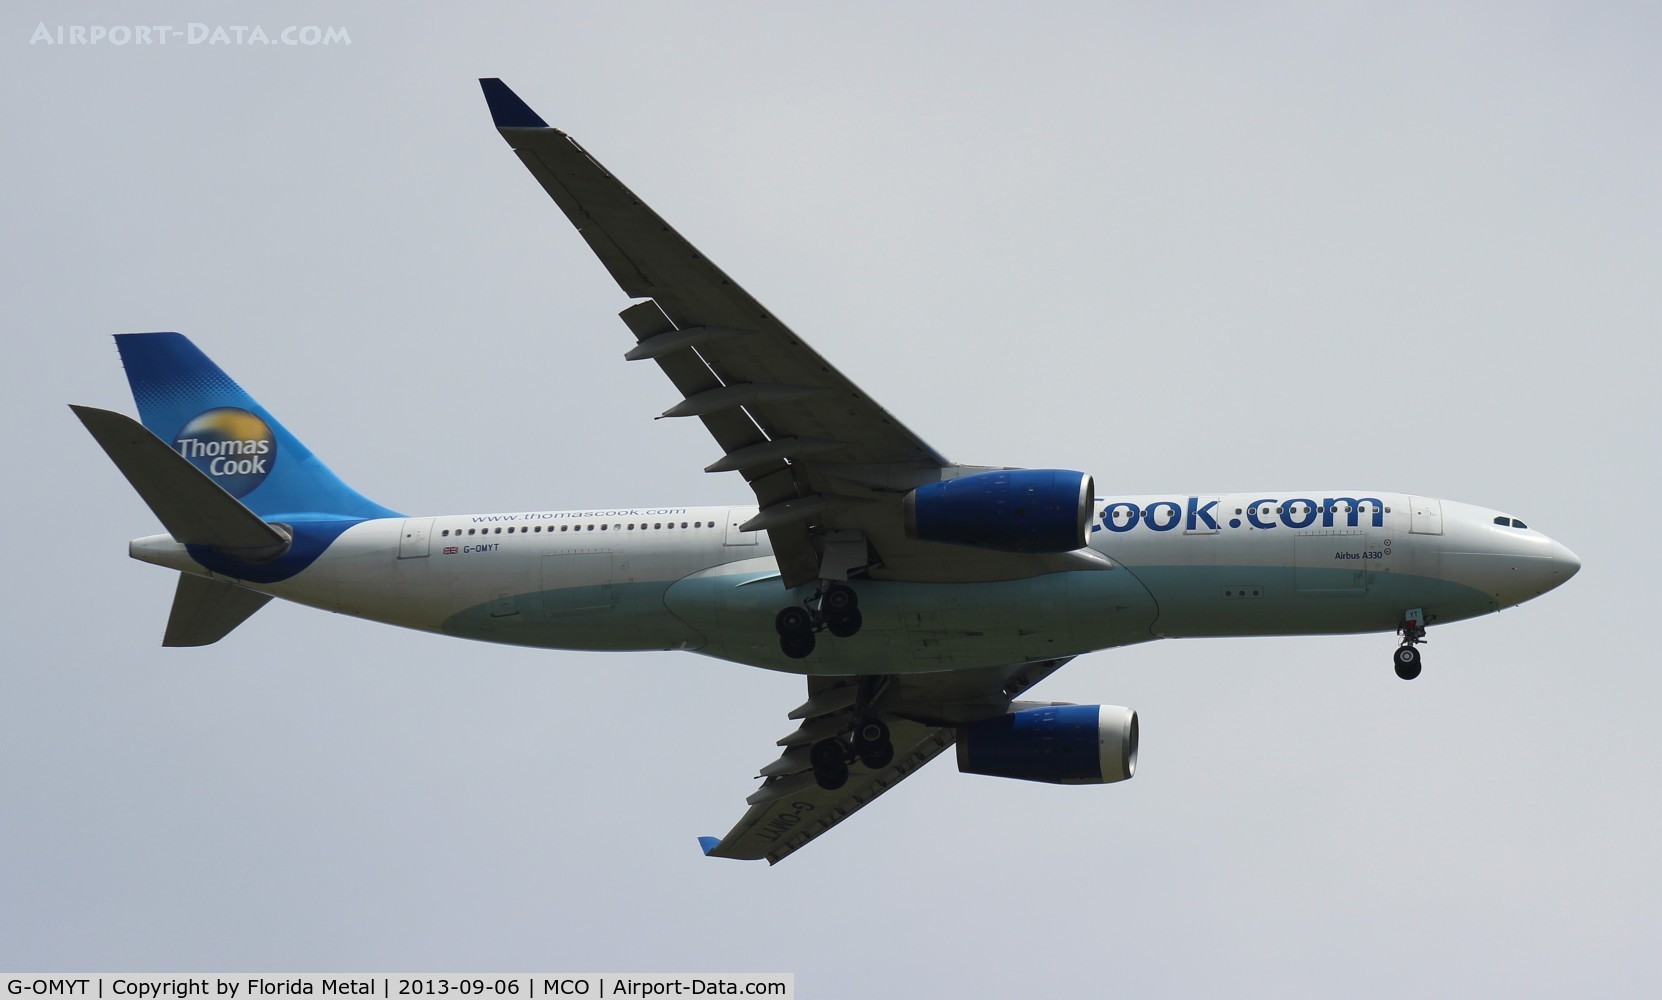 G-OMYT, 1999 Airbus A330-243 C/N 301, Thomas Cook A330 diversion from SFB due to storms